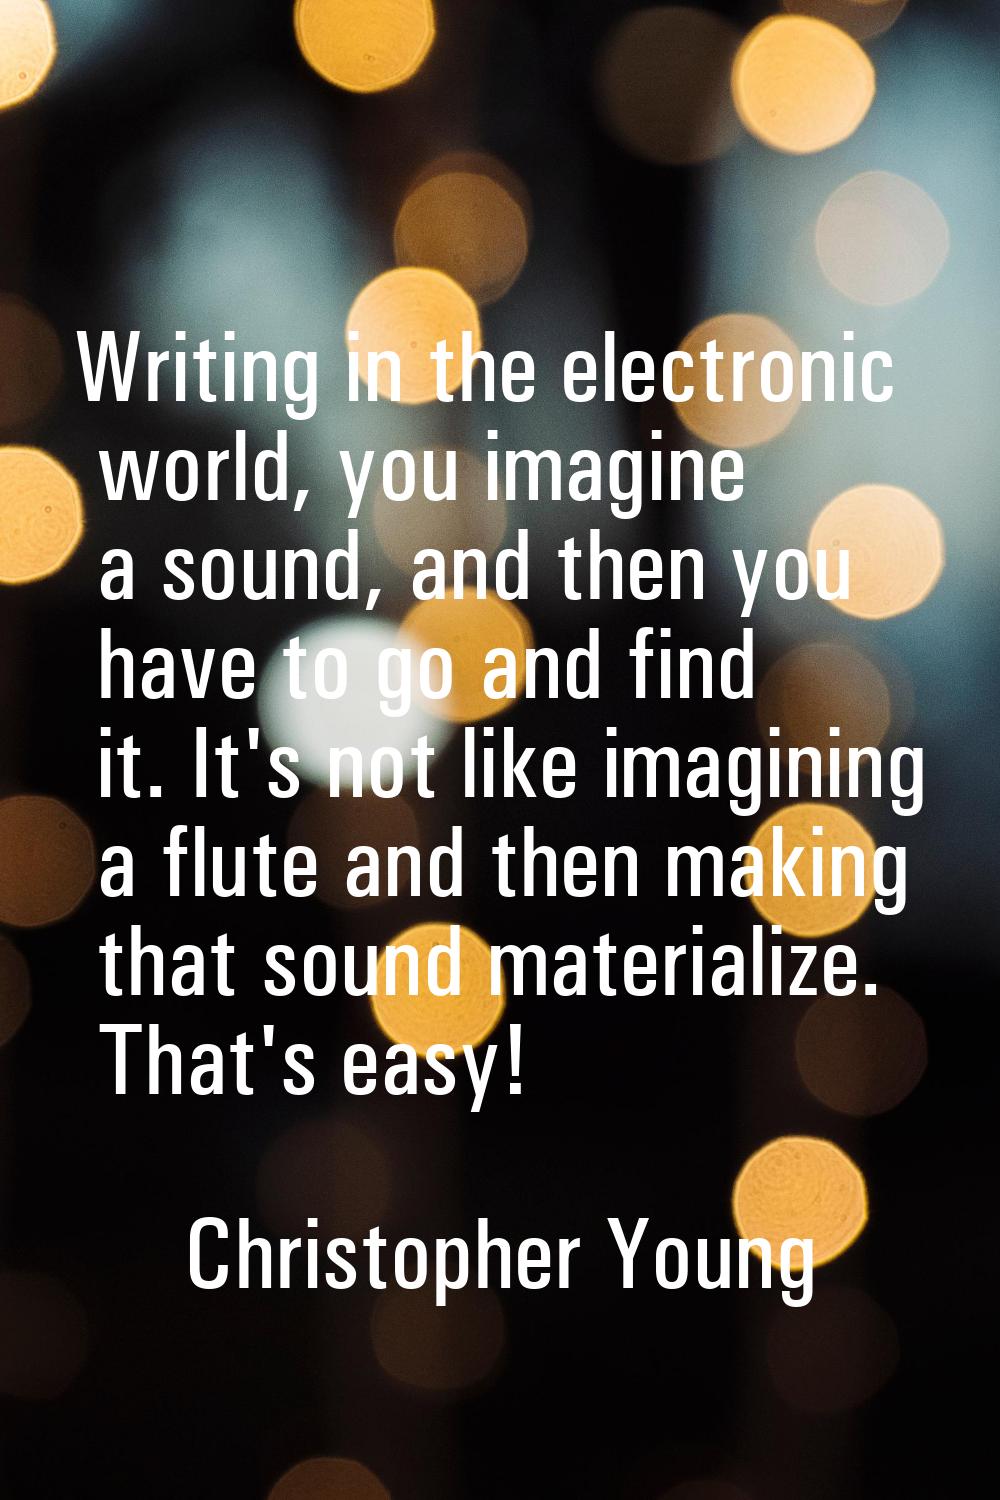 Writing in the electronic world, you imagine a sound, and then you have to go and find it. It's not